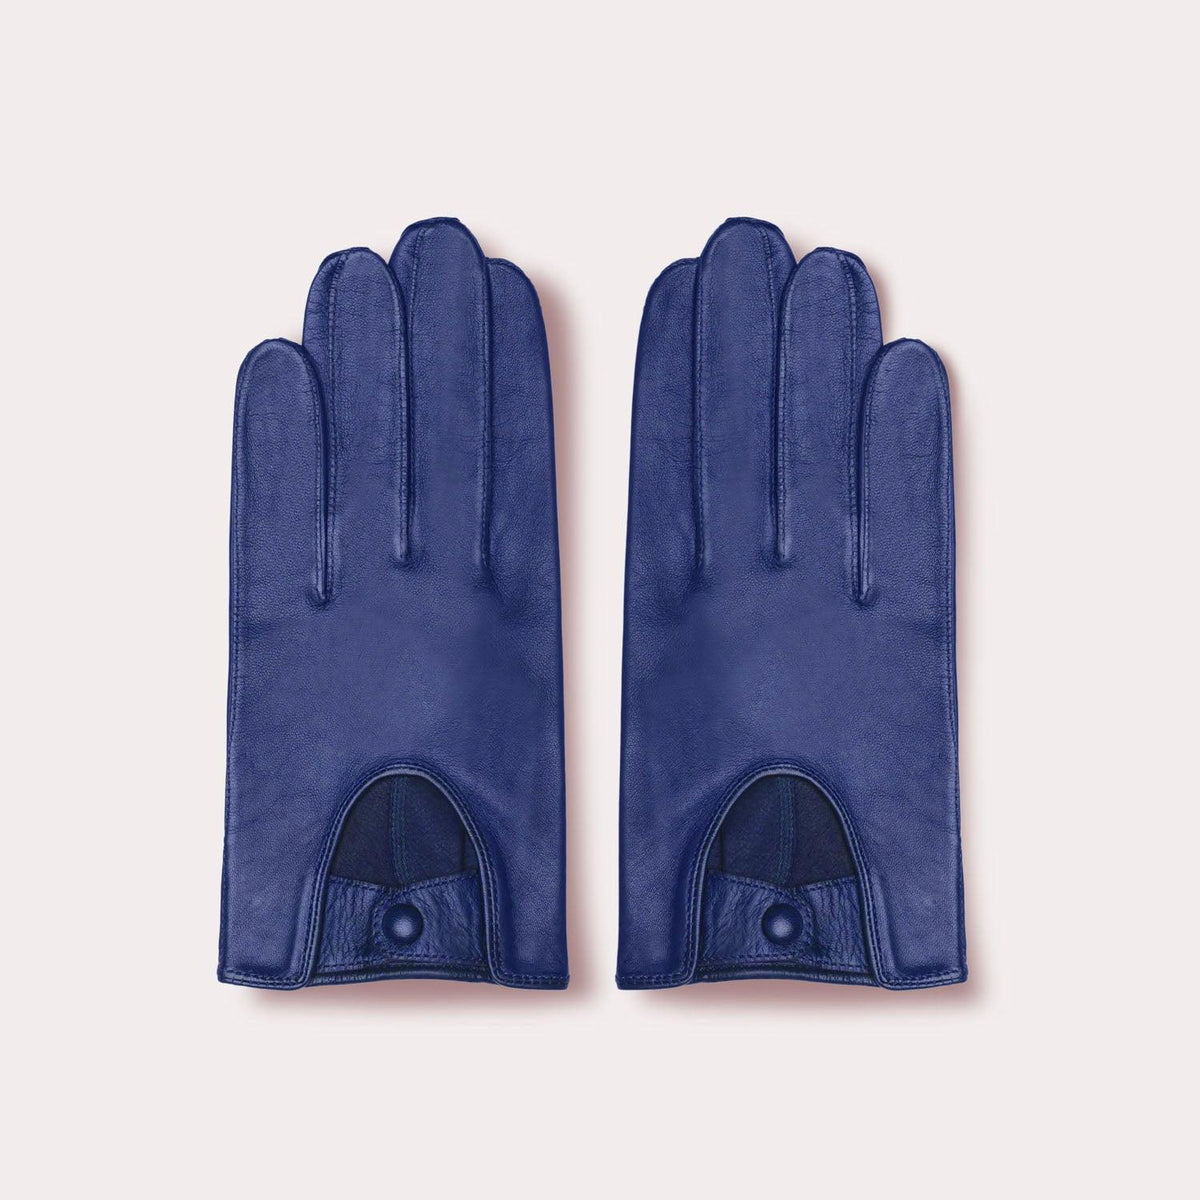 Blue leather men's driving gloves, male driving gloves.